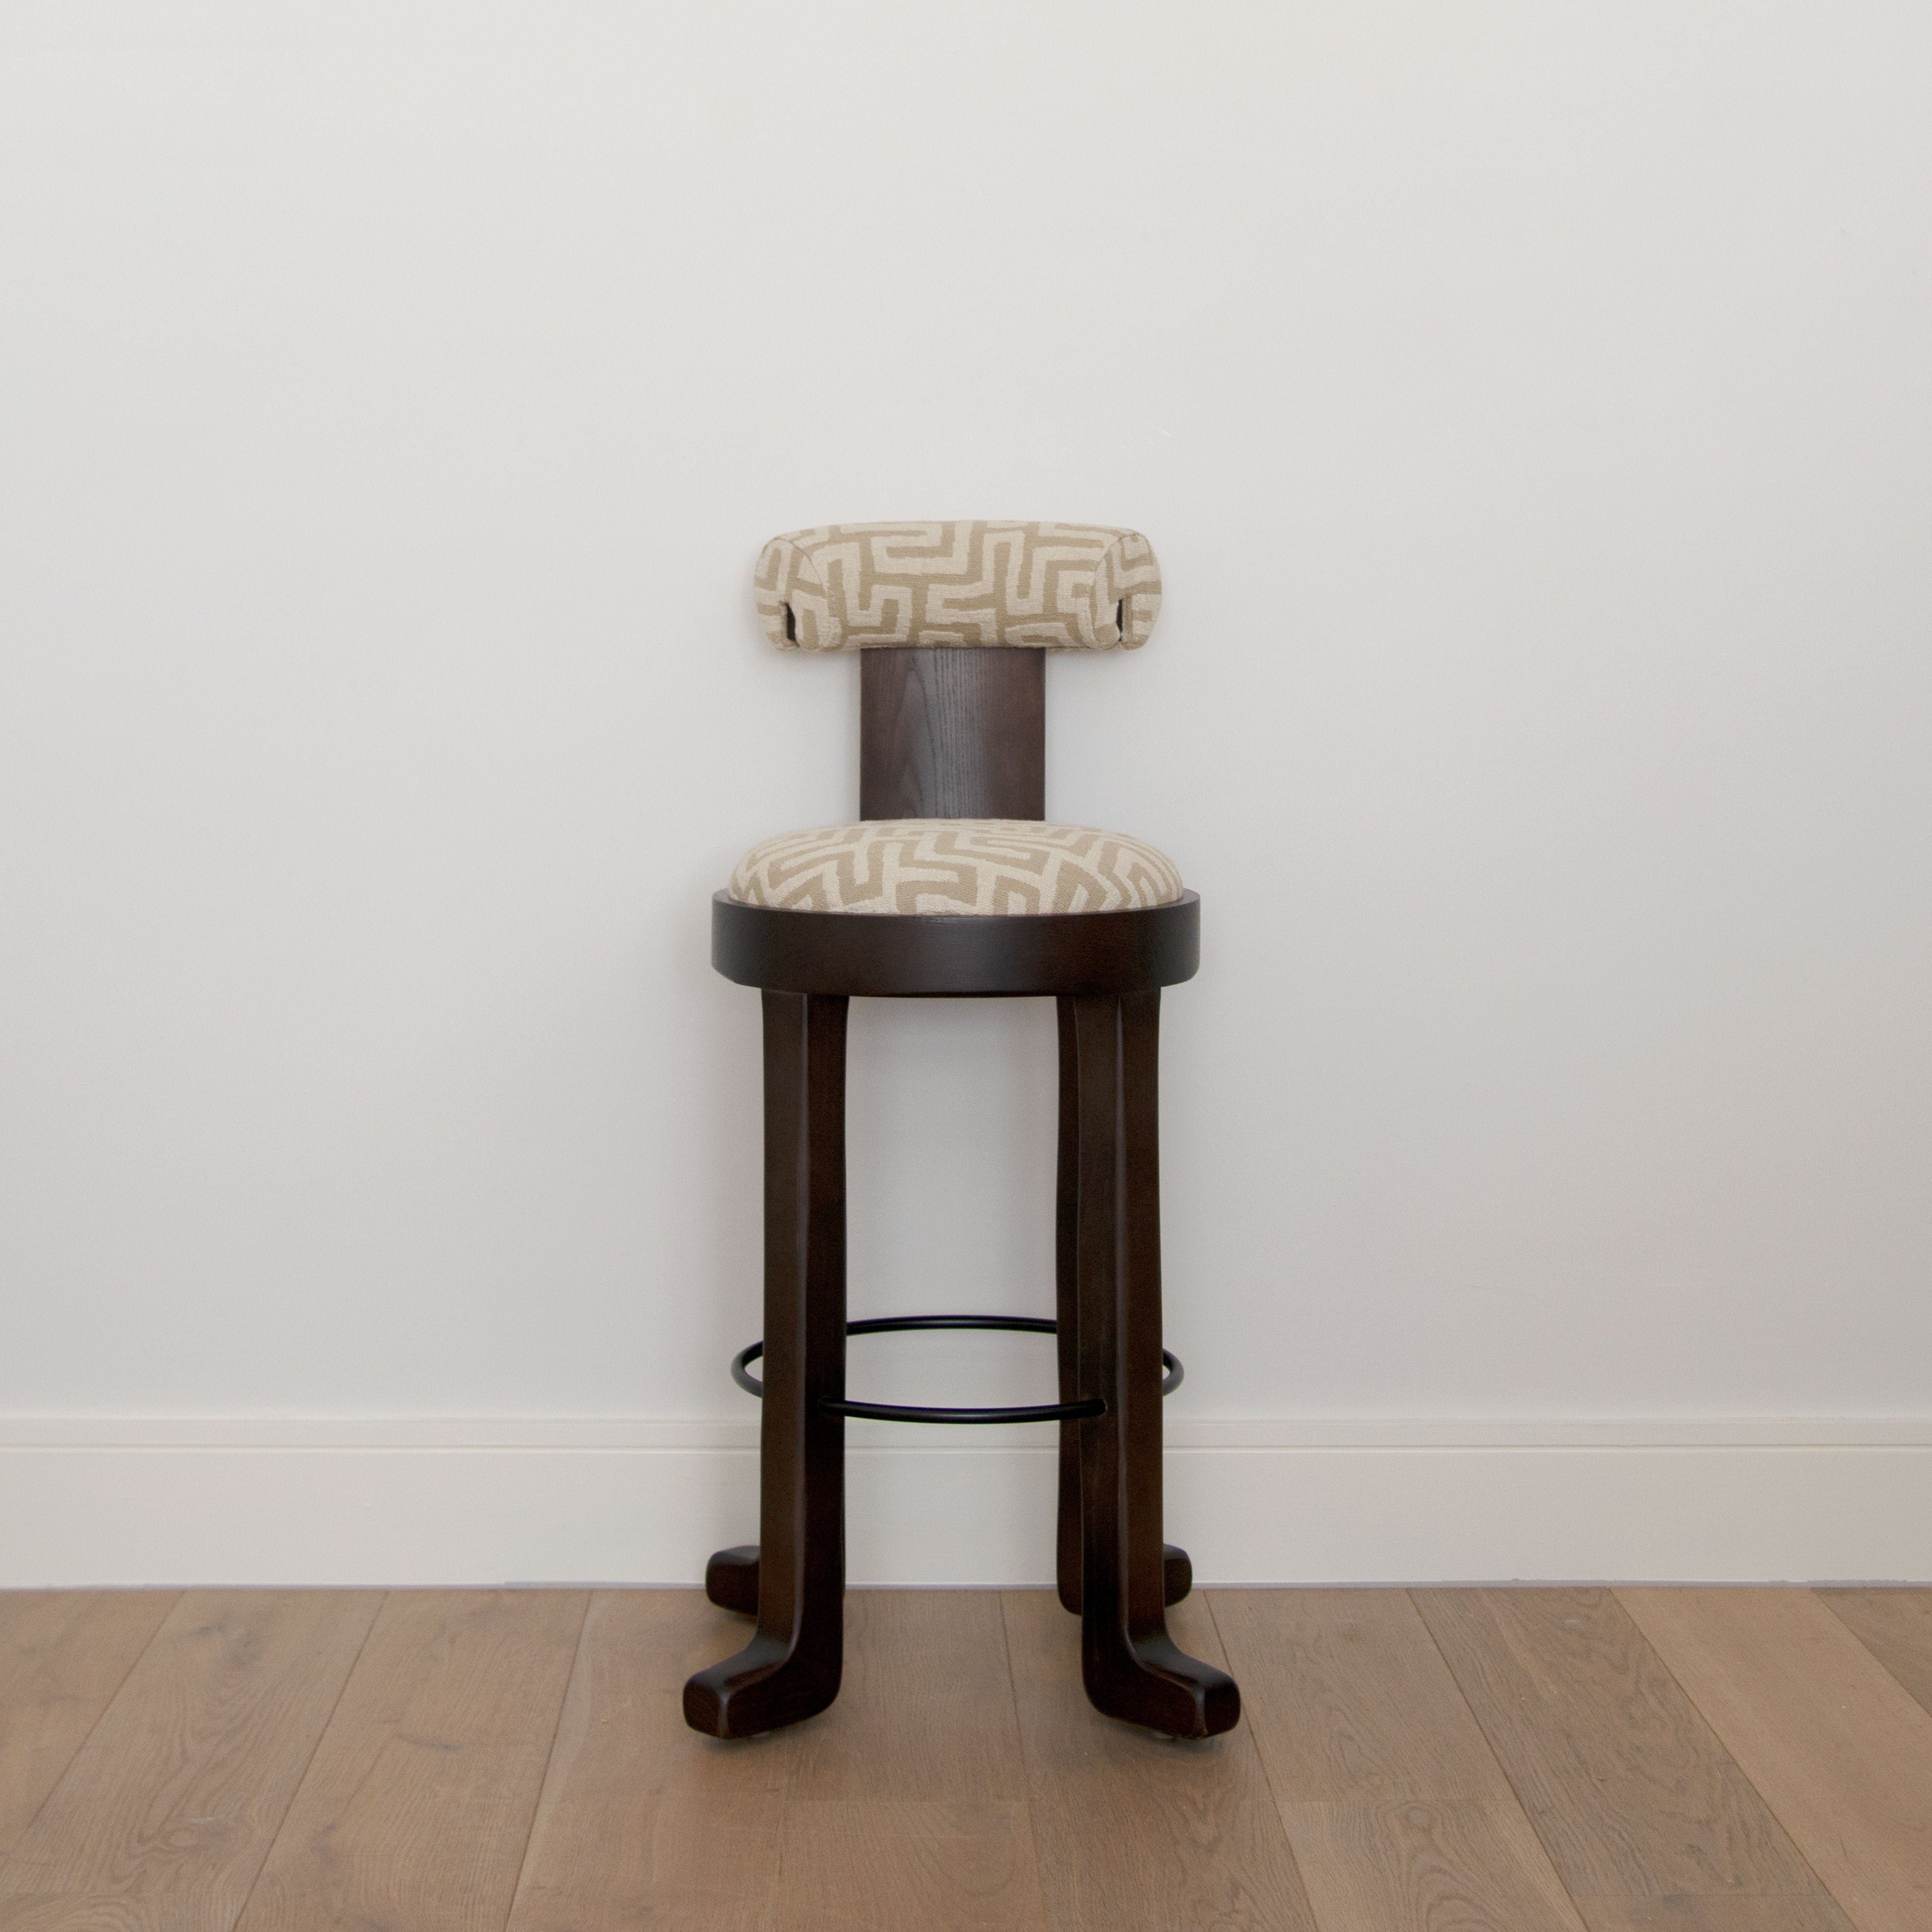 Front view of the Khayni Nya in Cream bar stool